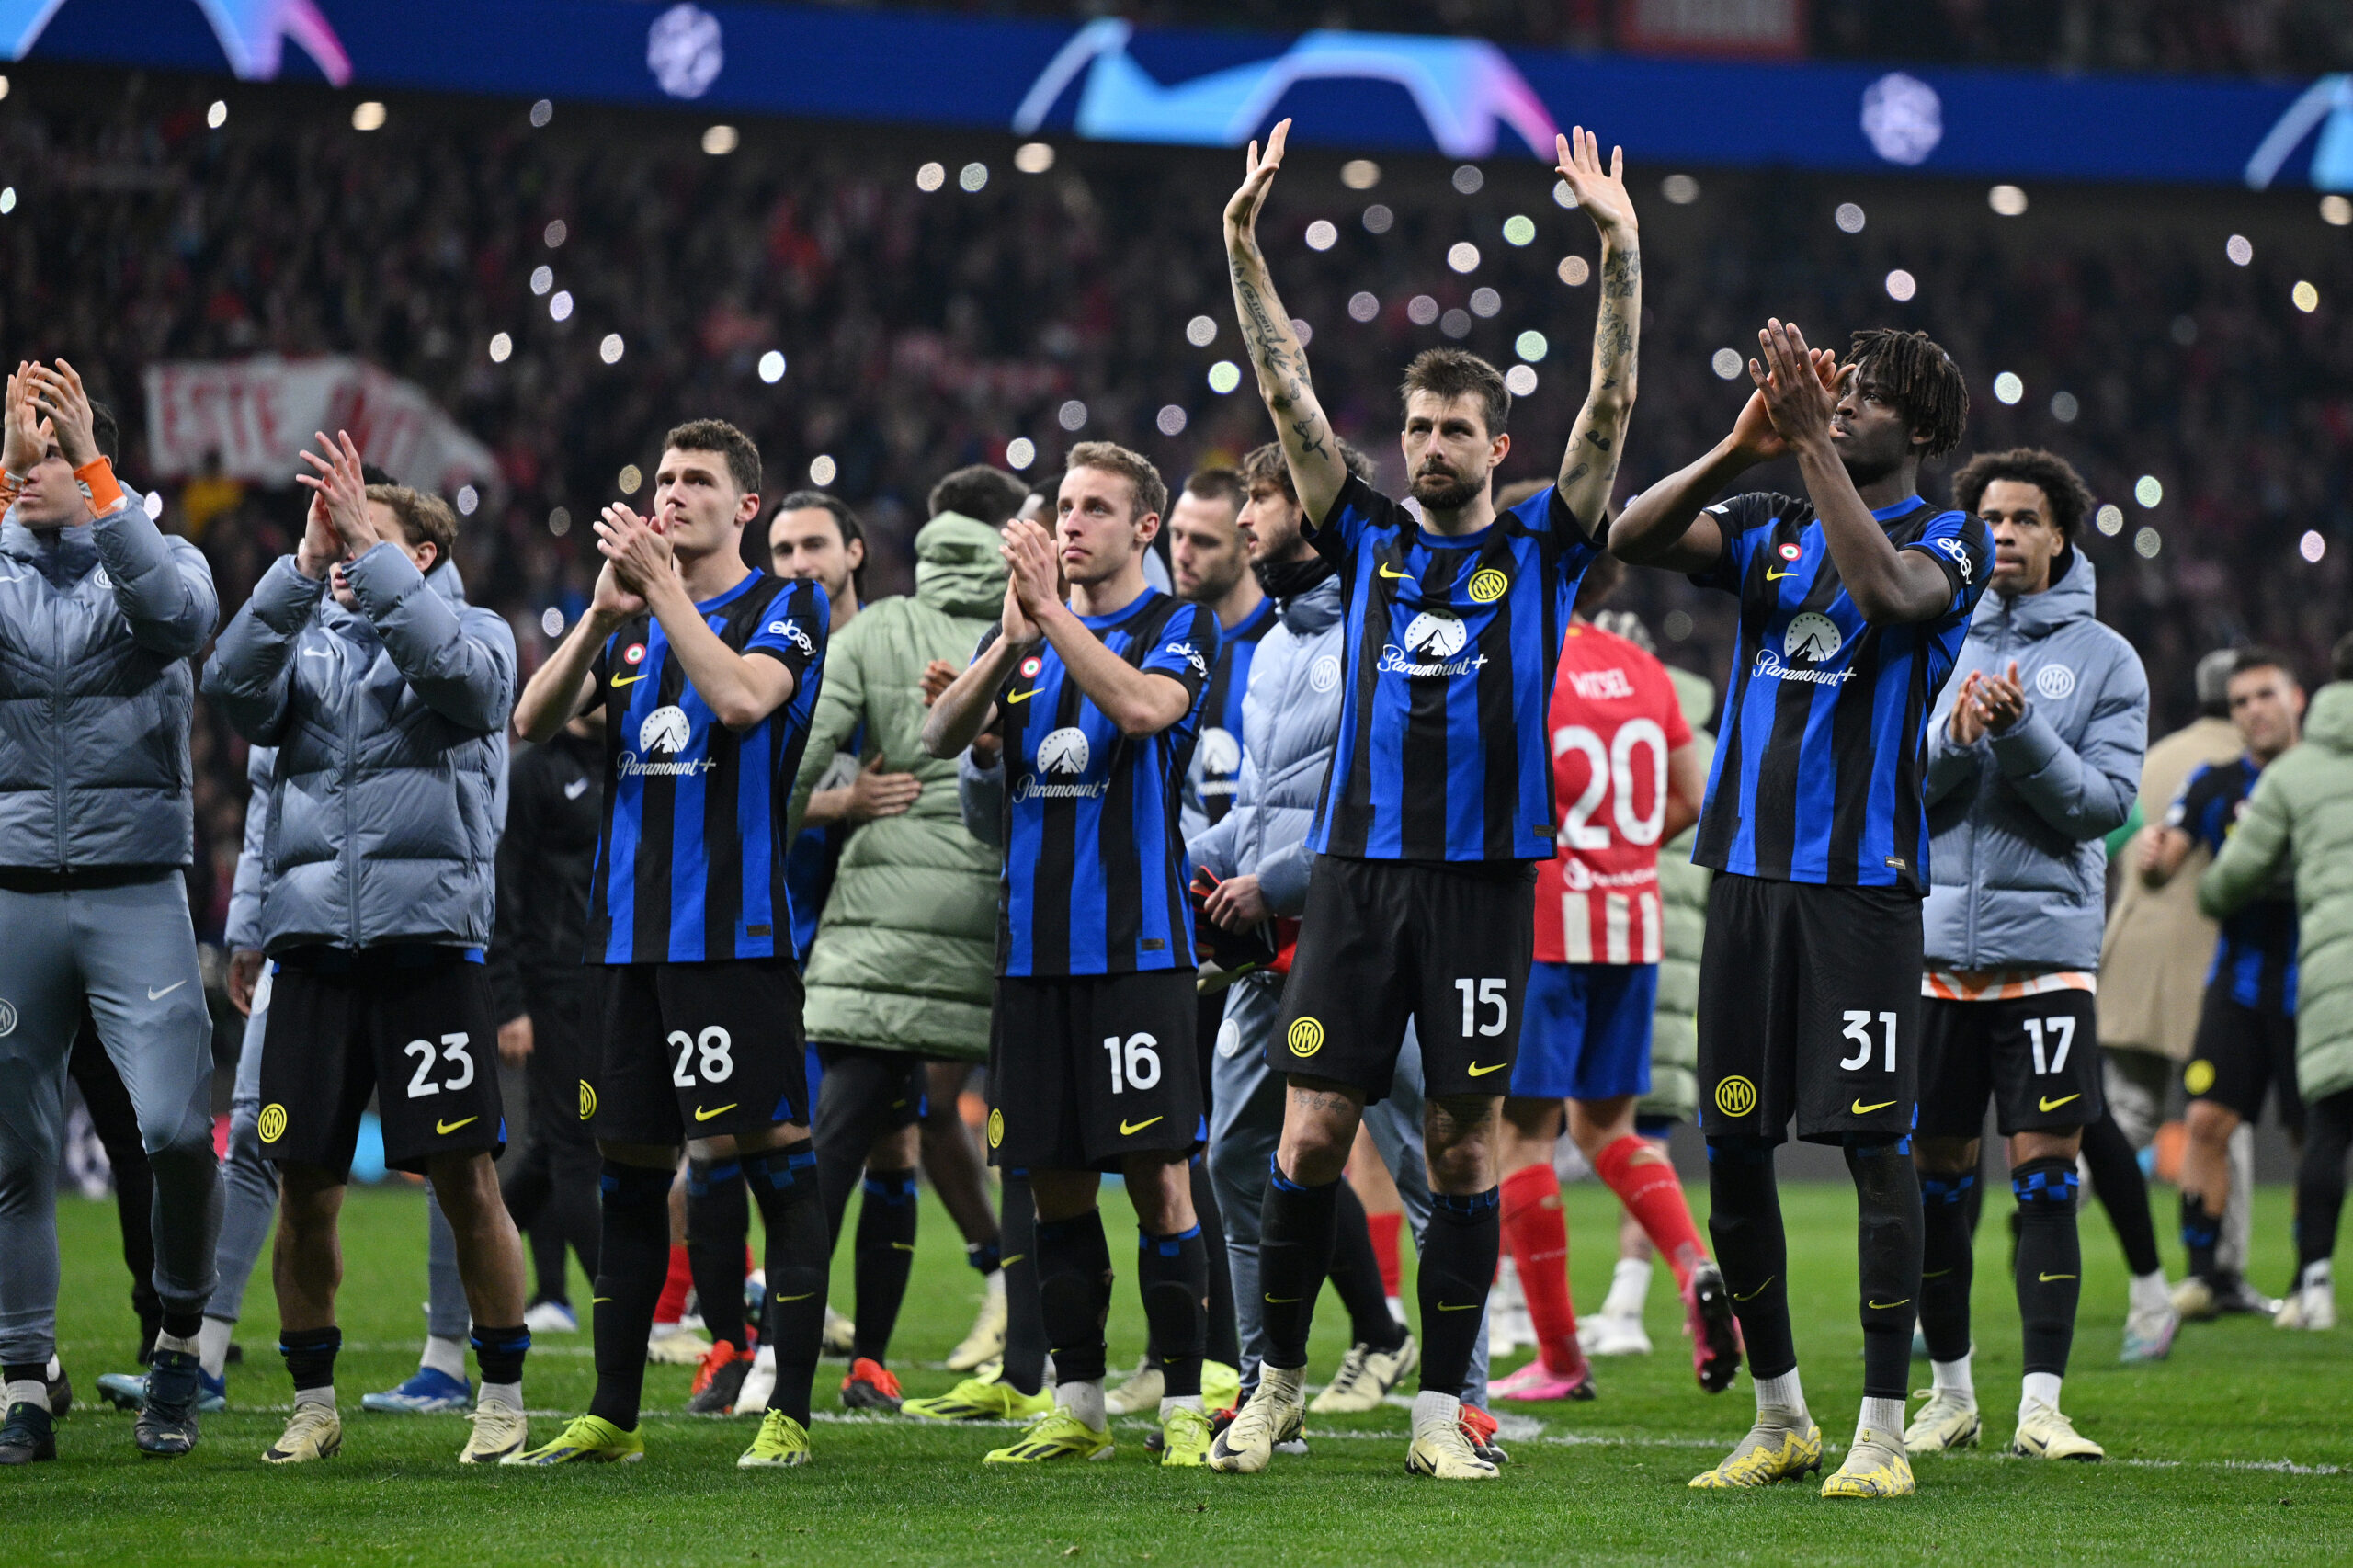 Going from Champions League finalists to getting eliminated in the Round of 16 surely stings, but it’s more of a missed opportunity than a failure for Inter.